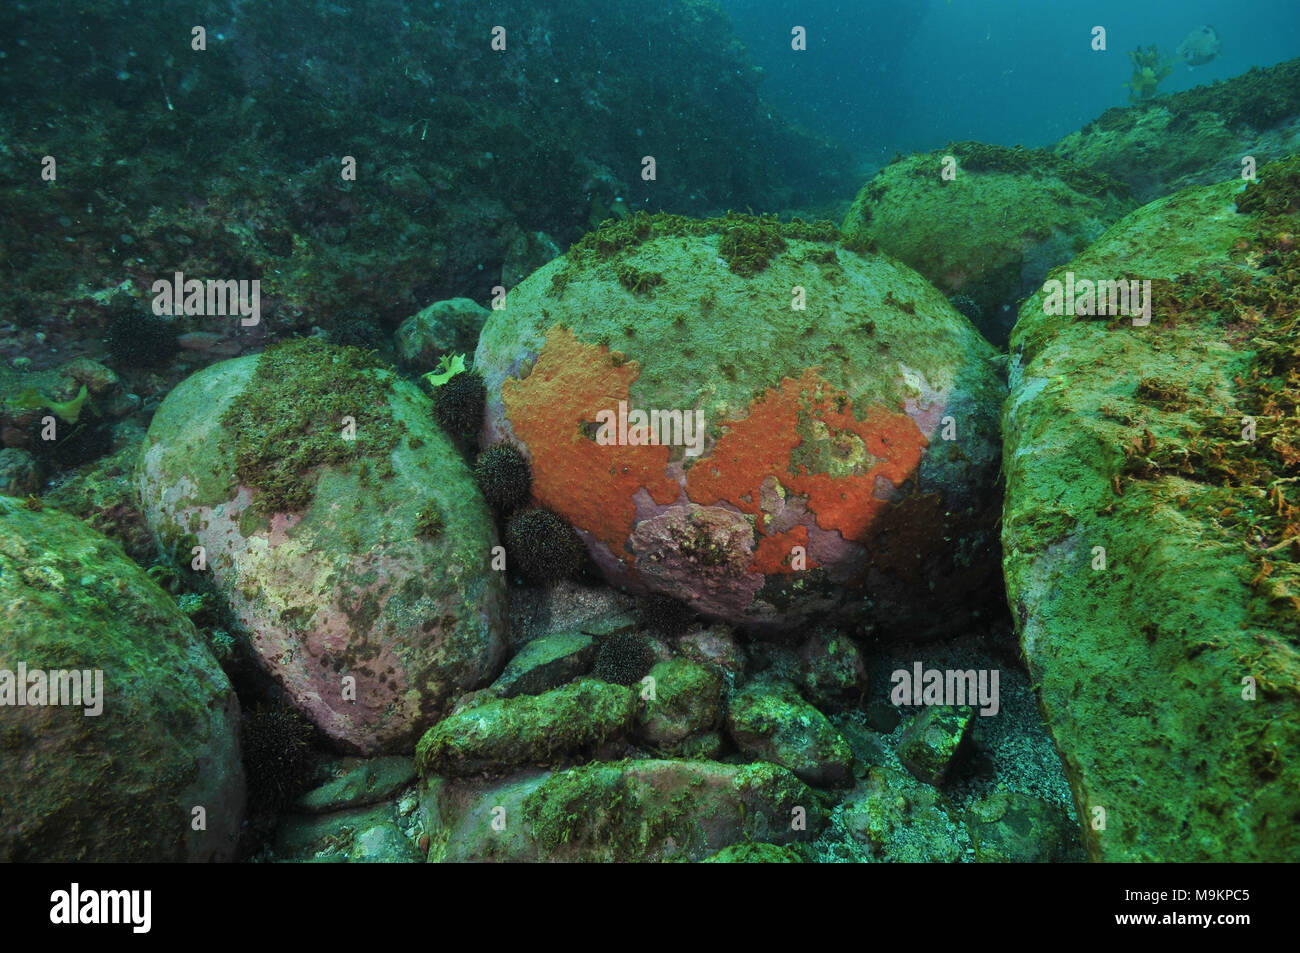 Large boulders on sea bottom covered with unpleasant brownish short algae with sea urchins hiding among them. Stock Photo